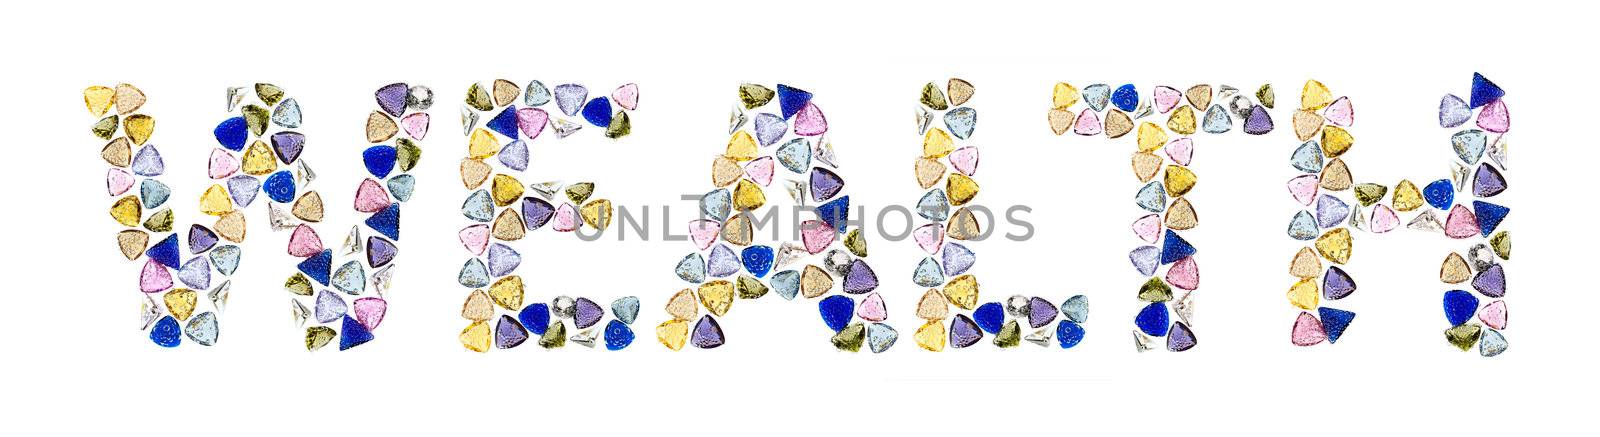 Gemstones words, "WEALTH". Isolated on white background. by pashabo